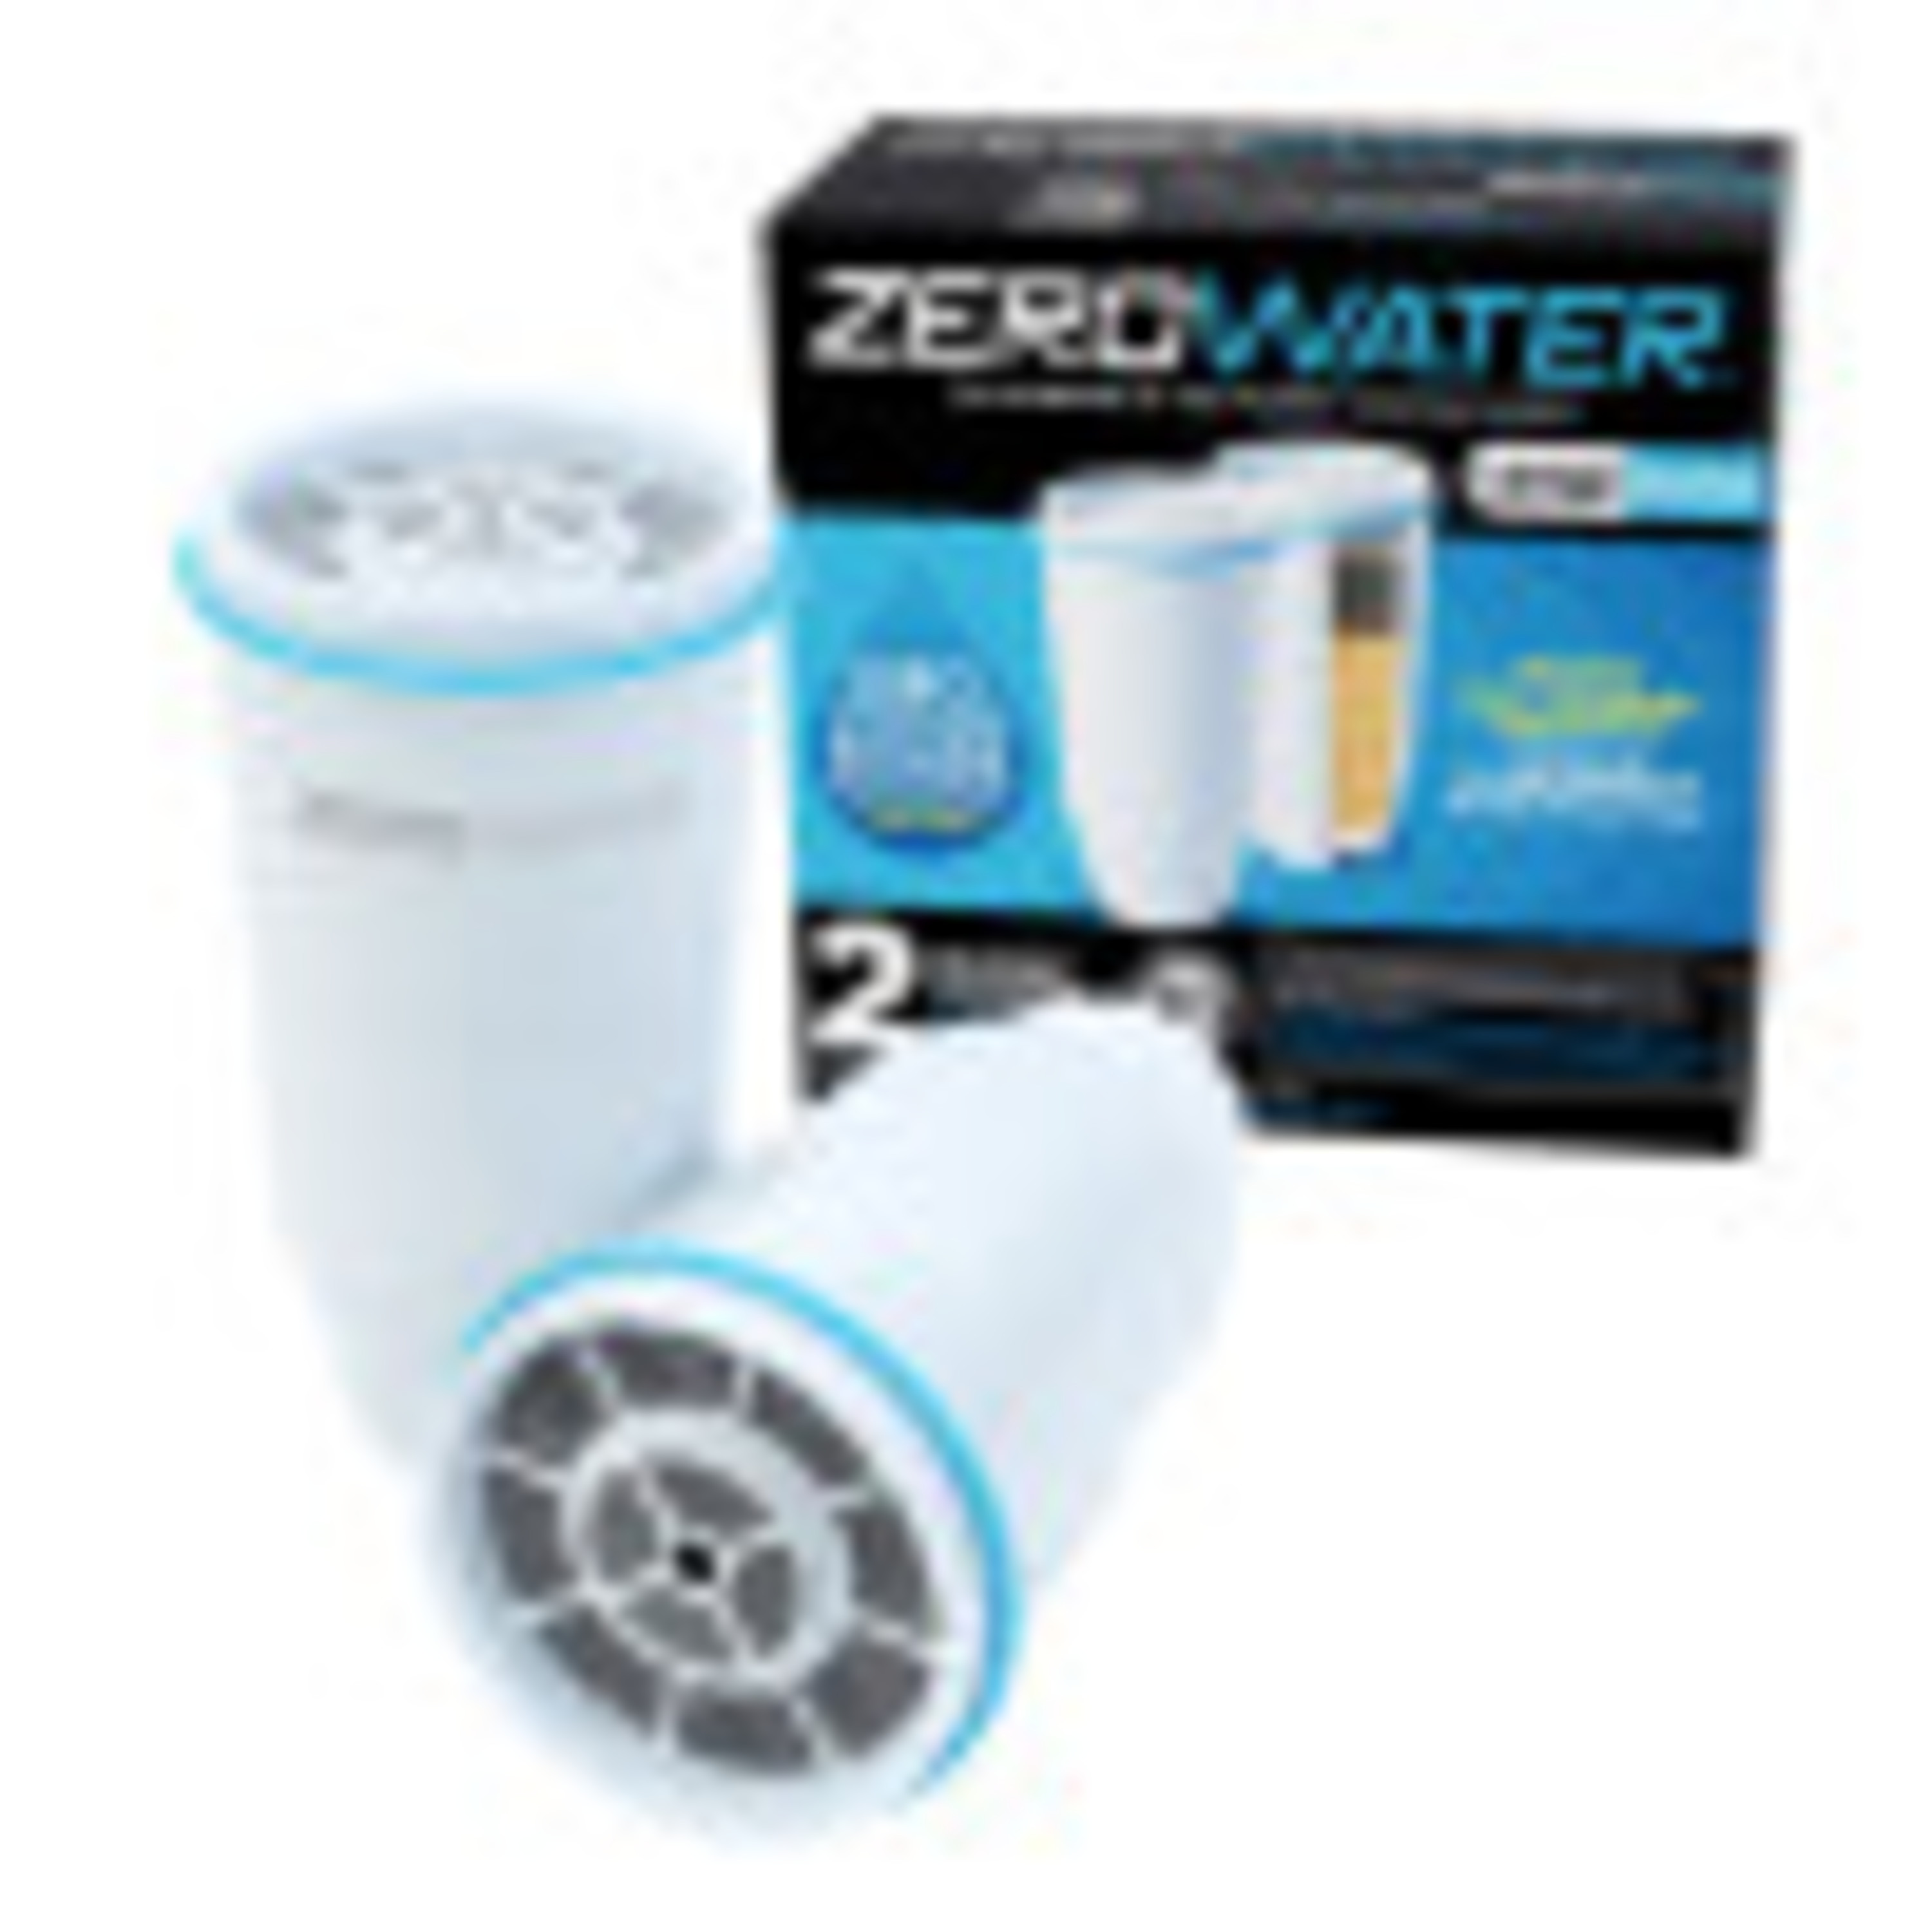 Zerowater 5-Stage Water Filter Replacement - 2 Pack - image 1 of 3